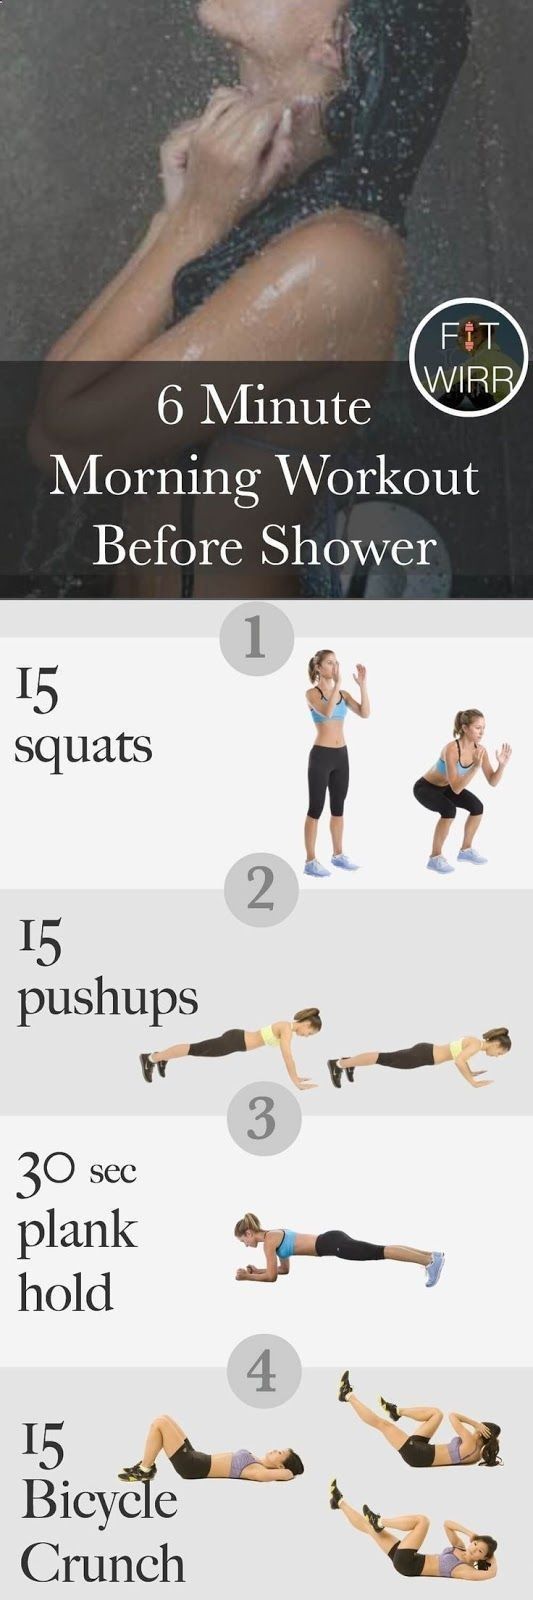 This 10 Week No-gym Home Workout Plan to LOSE WEIGHT FAST and Shedding BELLY FAT, You Can Do...